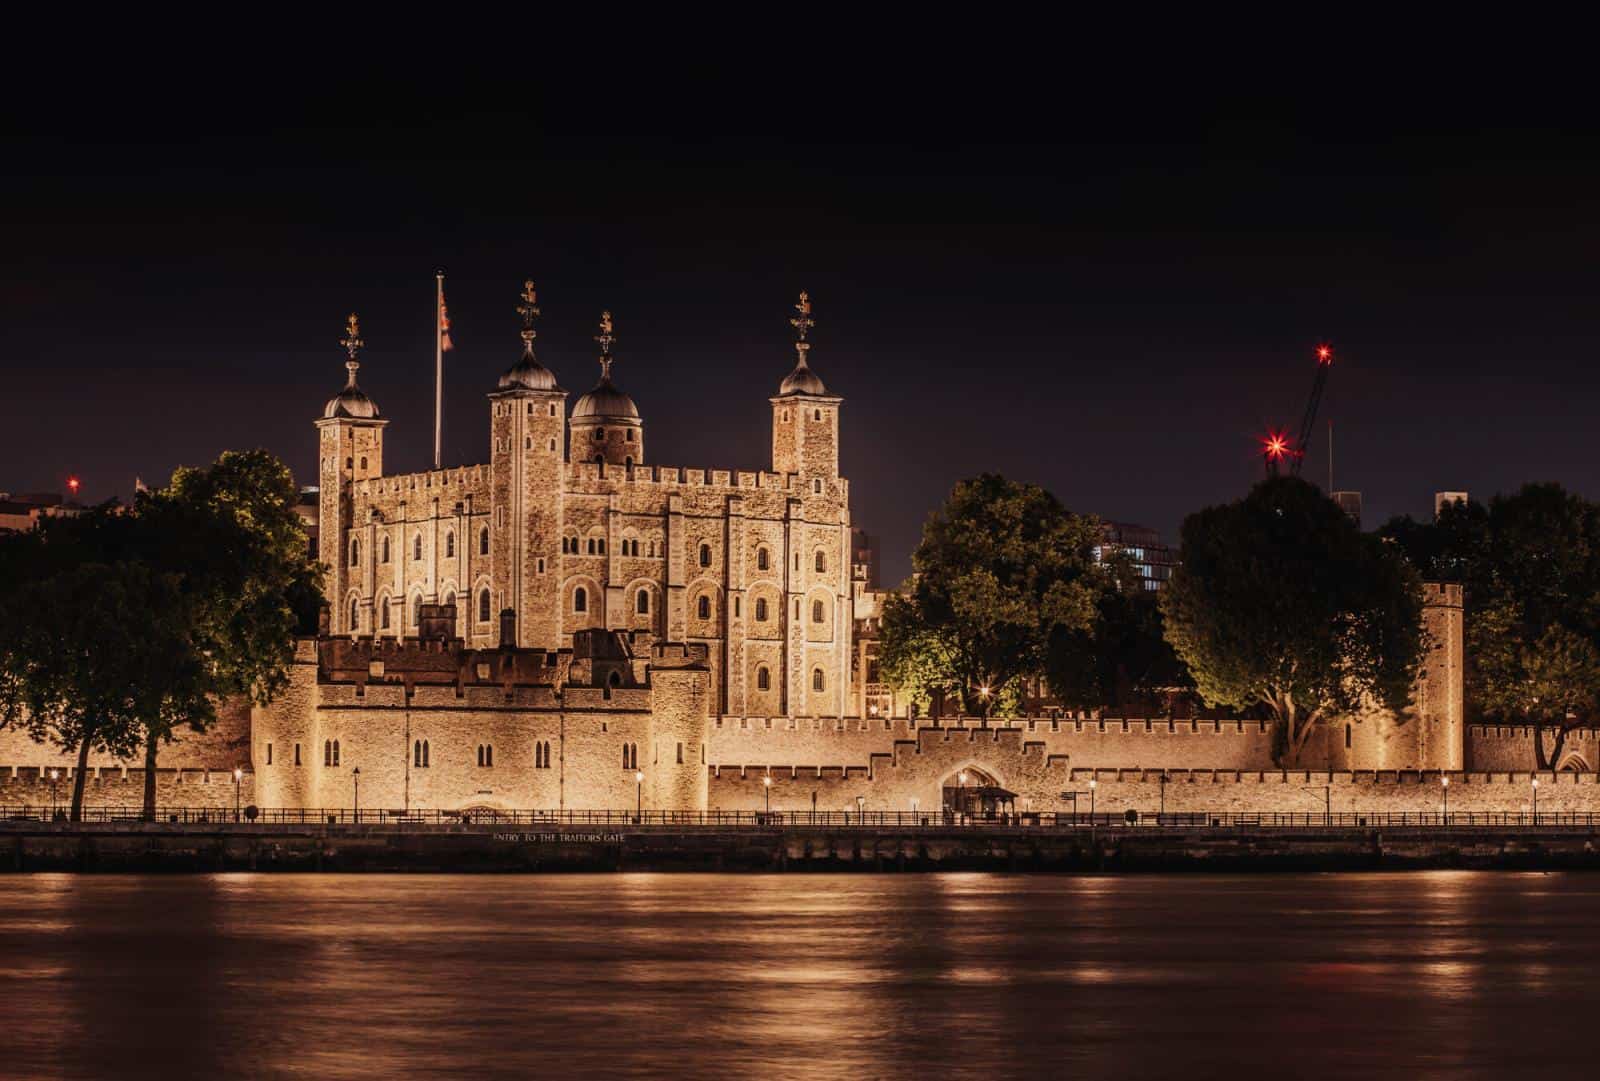 Tower of london at night